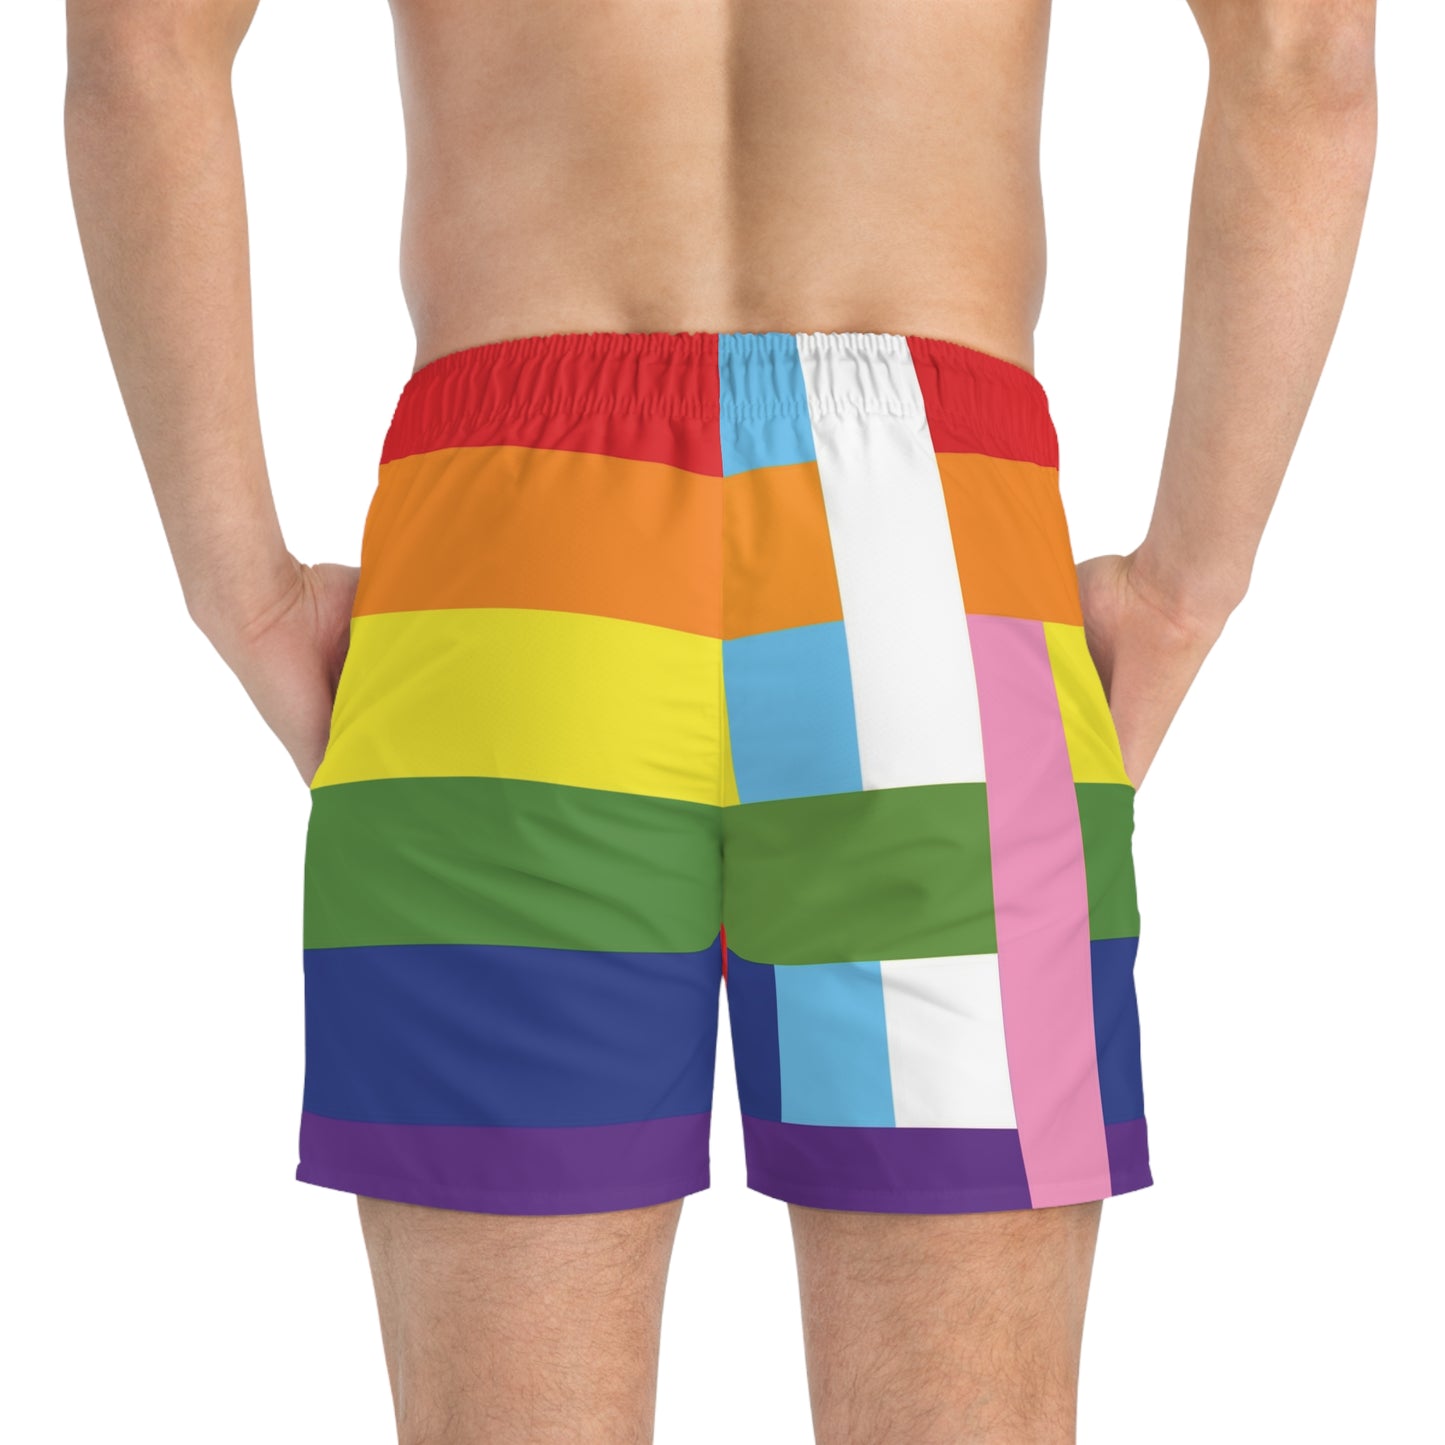 All in this together - Pride - Swim Trunks